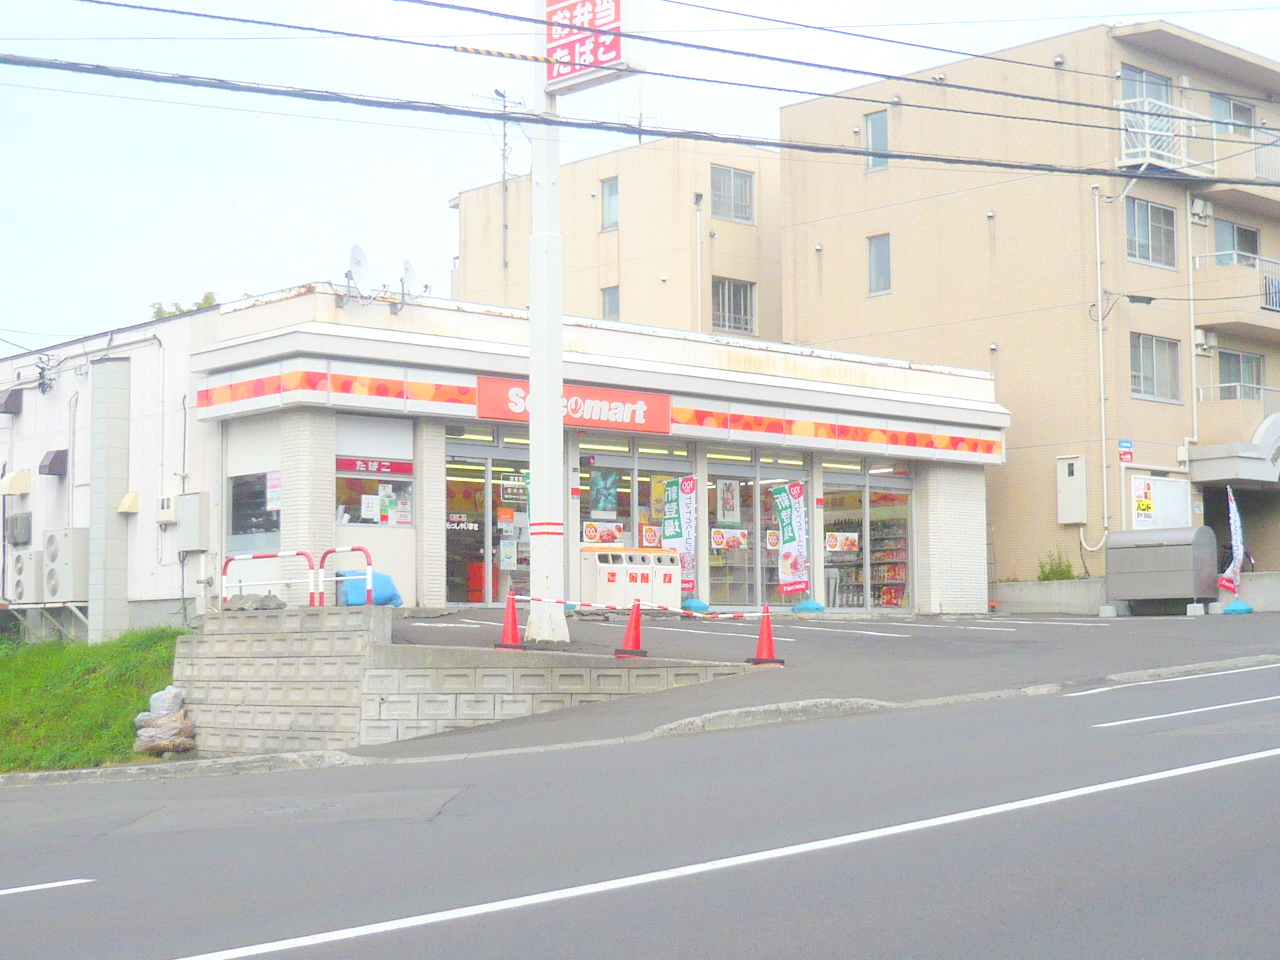 Convenience store. 600m until Nishioka store (convenience store), which was seen as Seicomart